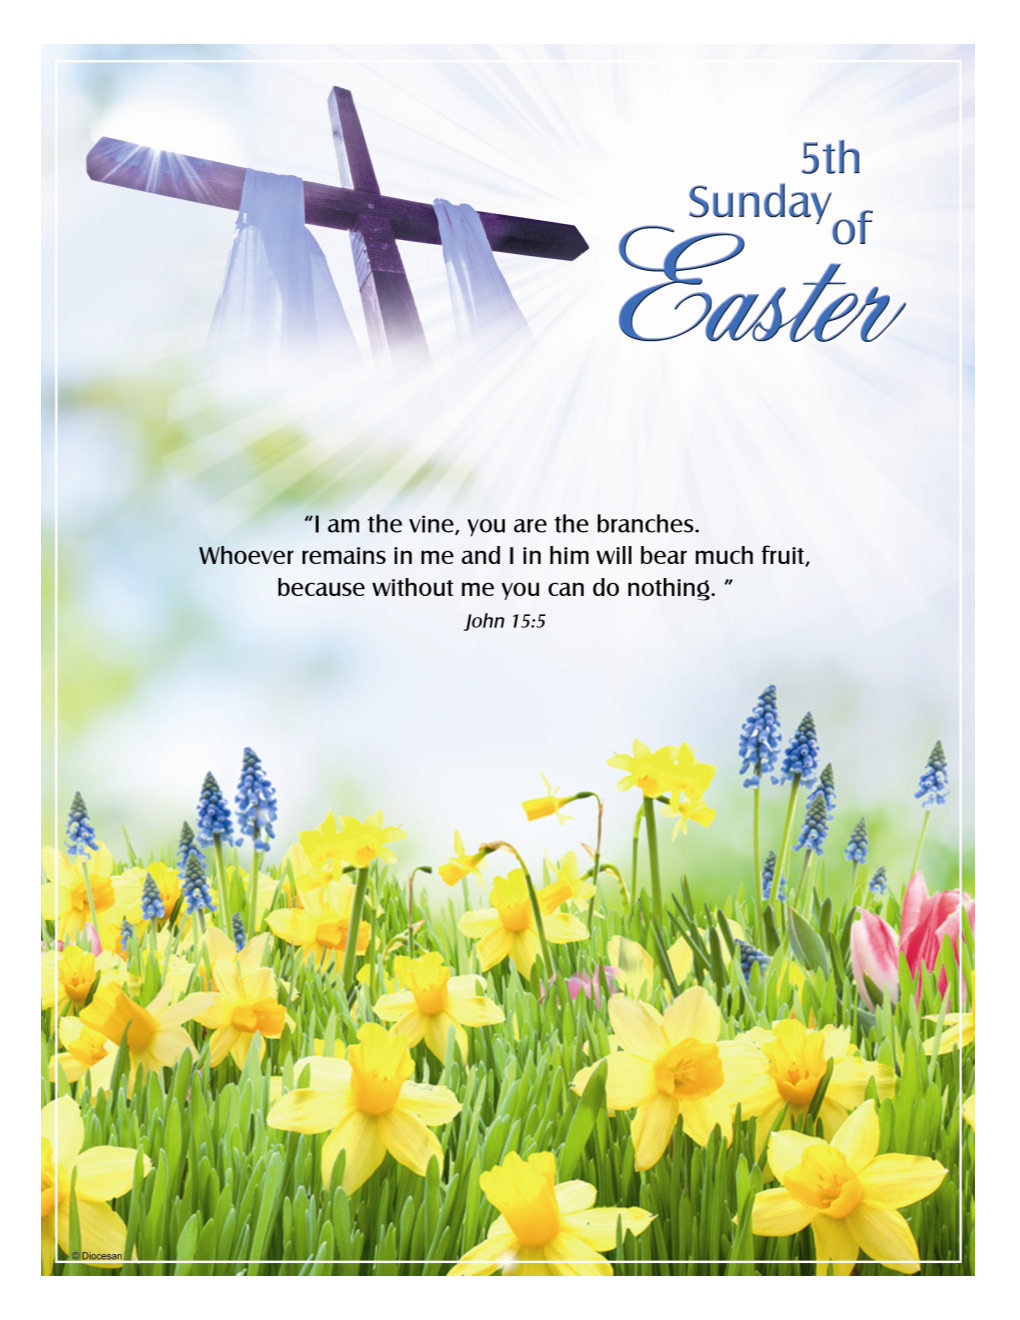 Fifth Sunday of Easter Page 1 April 29, 2018